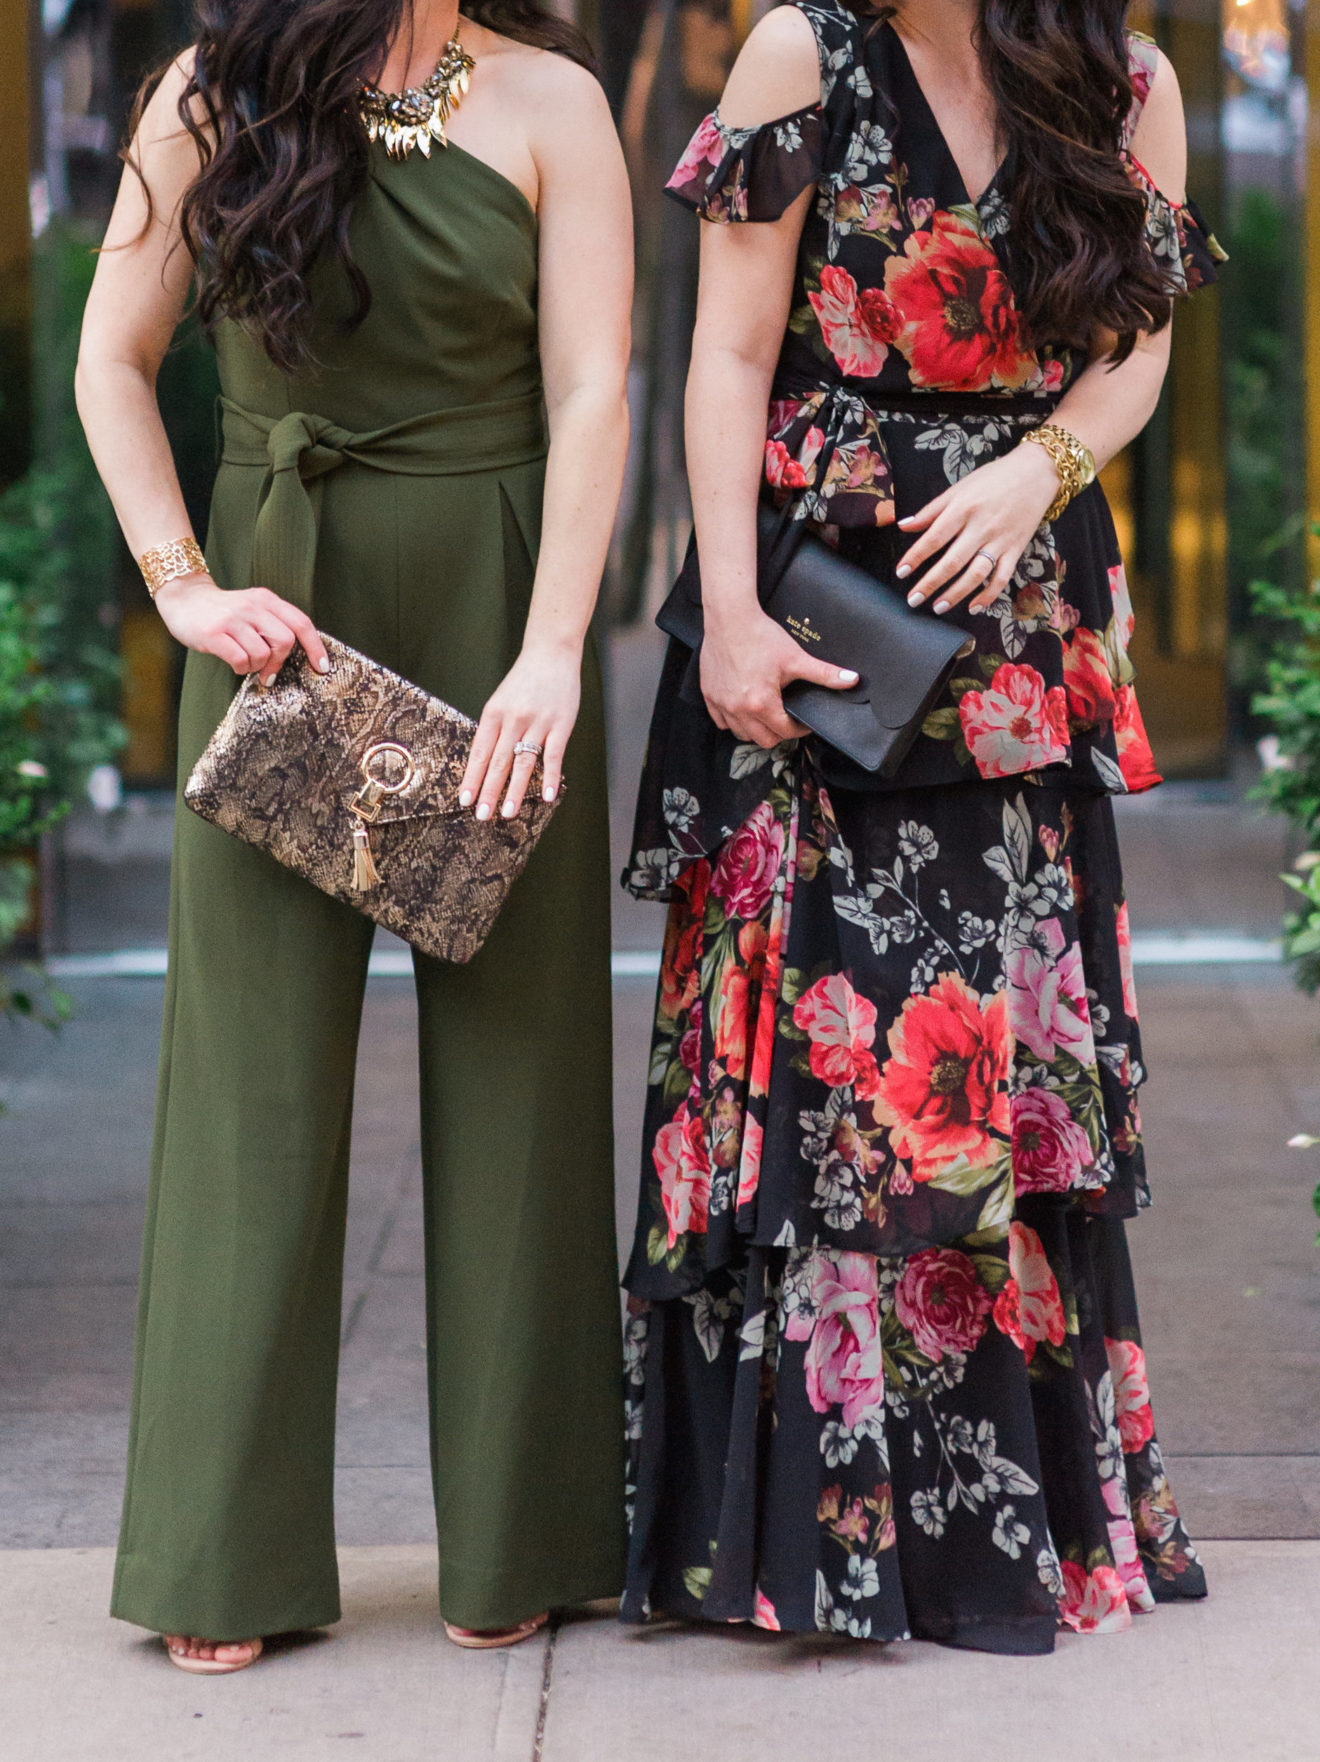 nyfw-2017-what-we-wore-dillards-the-double-take-girls-tahari-floral-maxi-green-jumpsuit